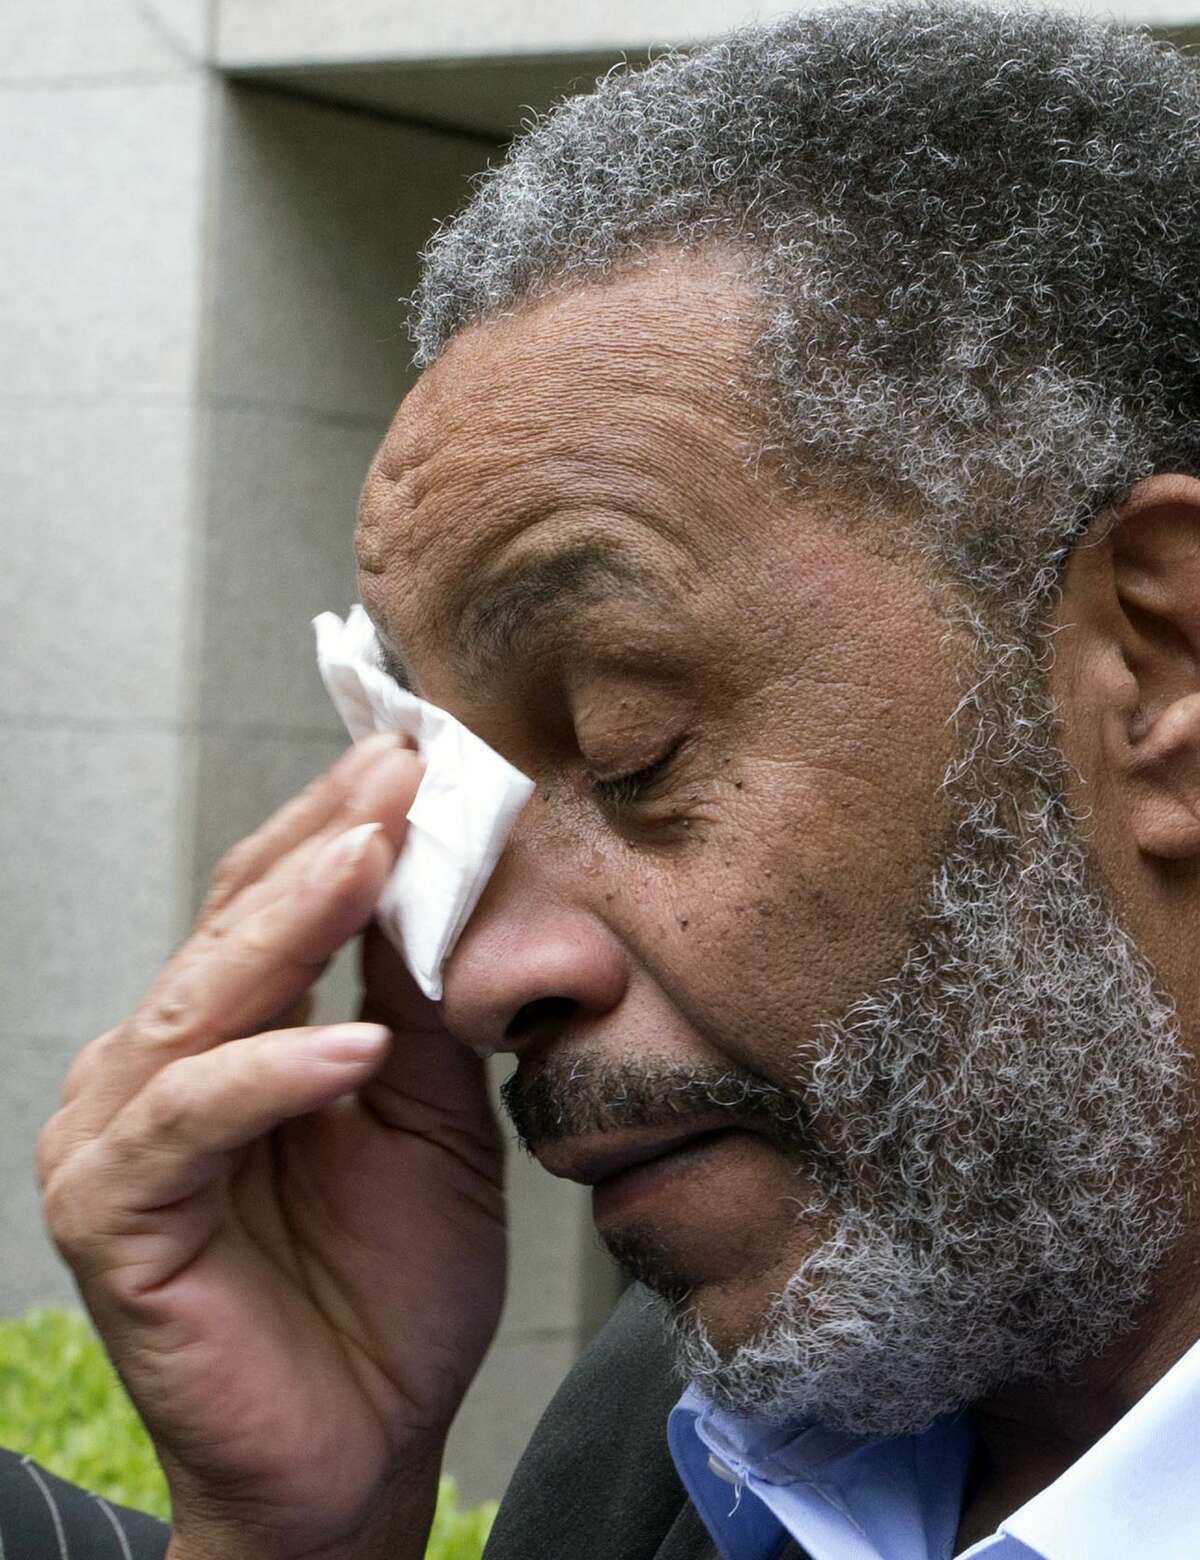 Anthony Ray Hinton wipes away tears after greeting friends and relatives upon leaving the Jefferson County jail, Friday, April 3, 2015, in Birmingham, Ala. Hinton spent nearly 30 years on Alabama’s death row, and was set free Friday after prosecutors told a judge they won’t re-try him for the 1985 slayings of two fast-food managers.